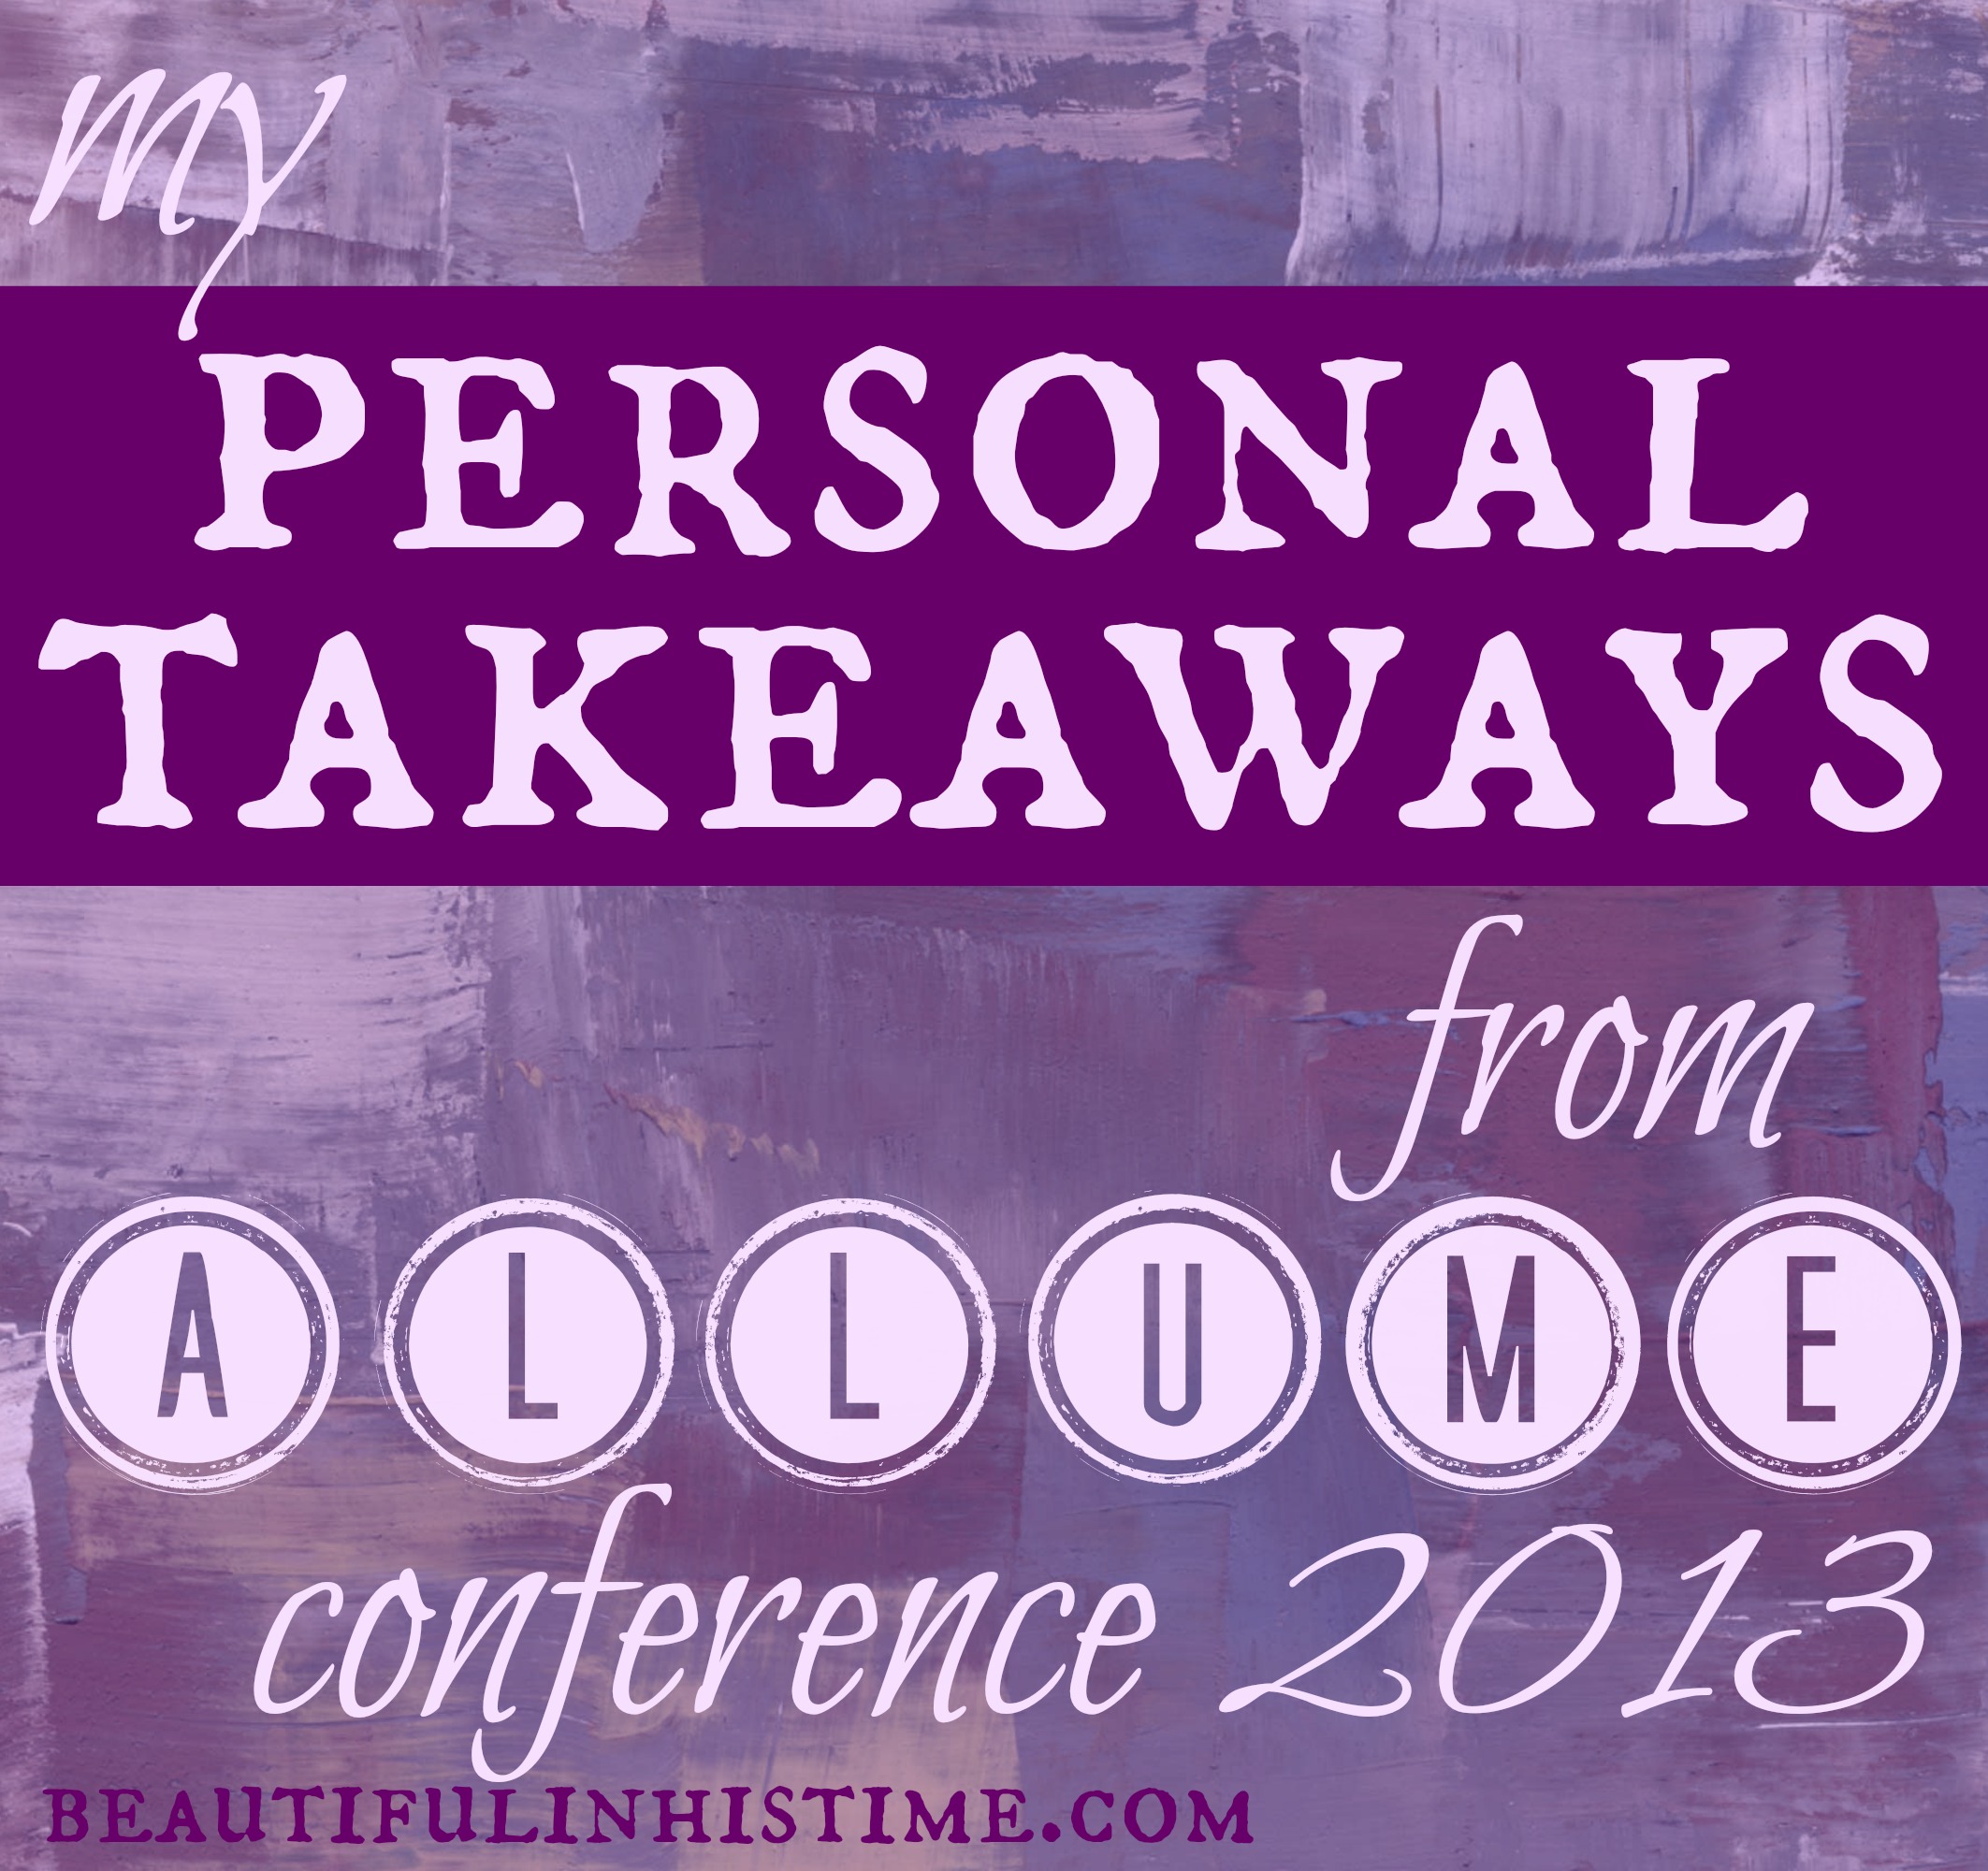 She made time for me {takeaways from #allume}